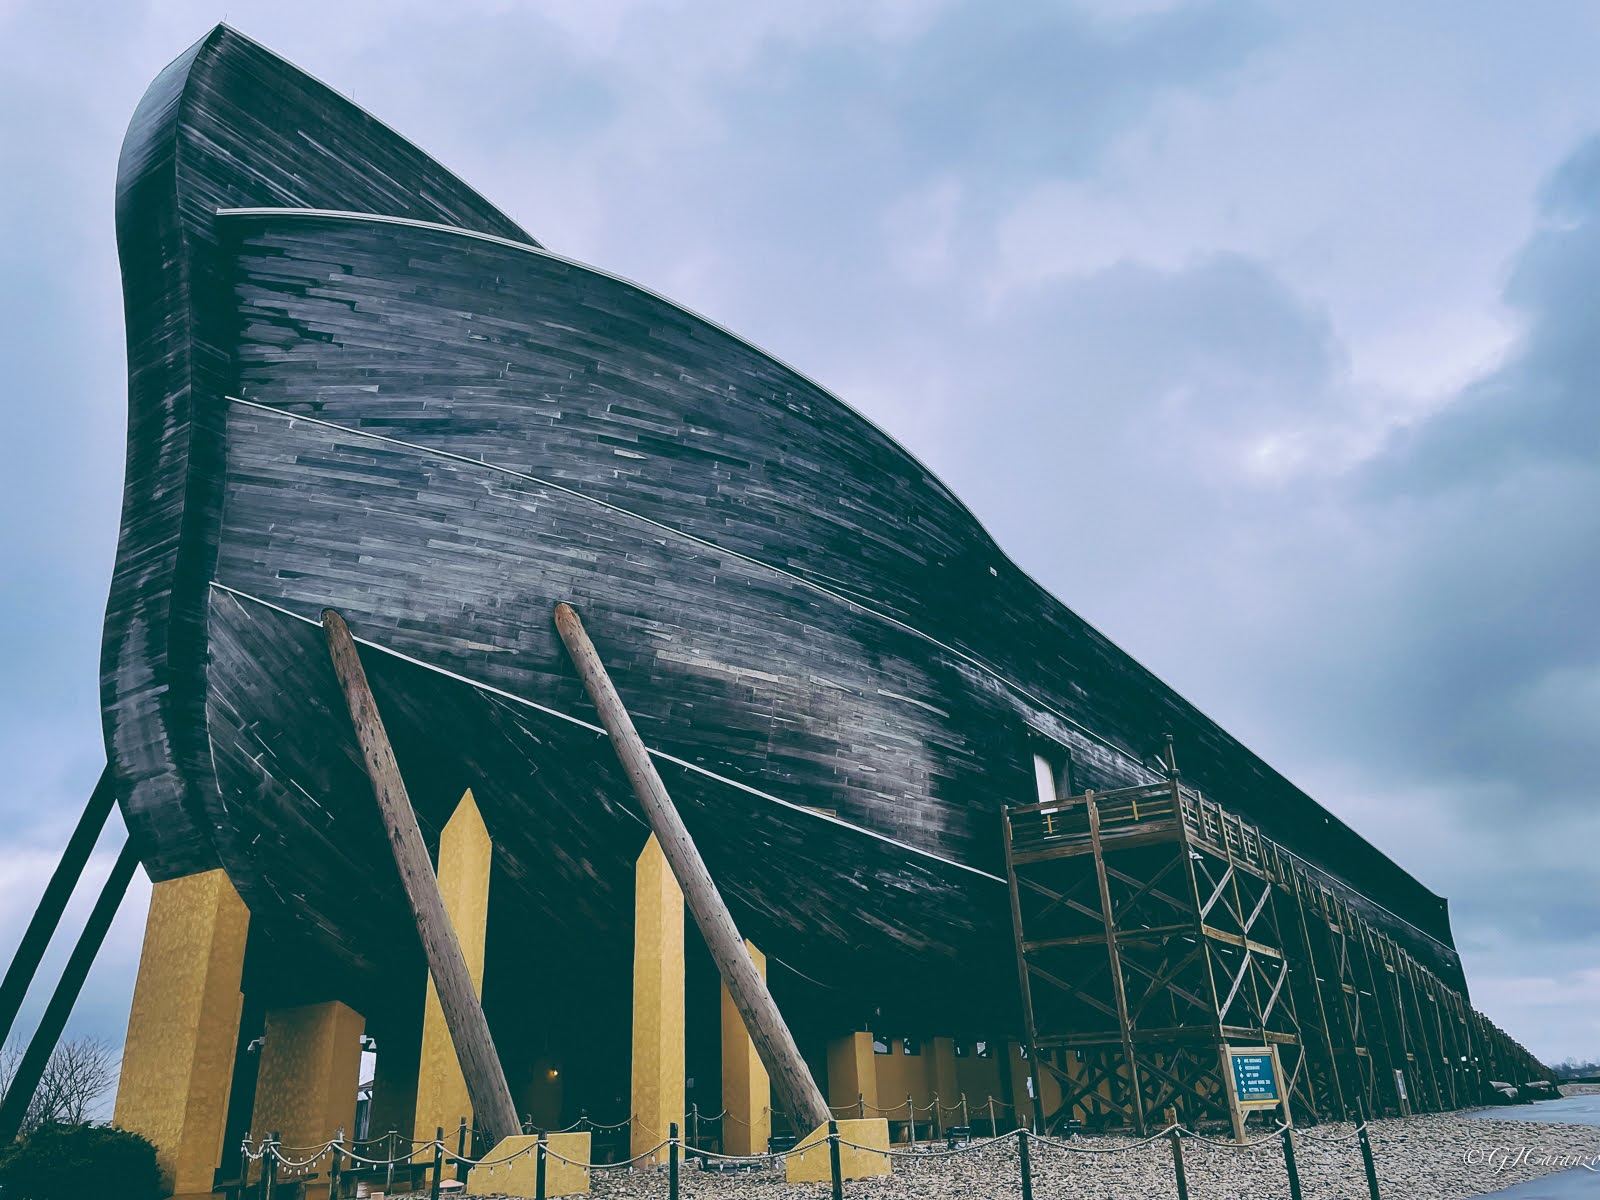 Trave Blog: Canada-US Road Trip to Home: Stopover at the Ark Encounter in Williamstown, Kentucky